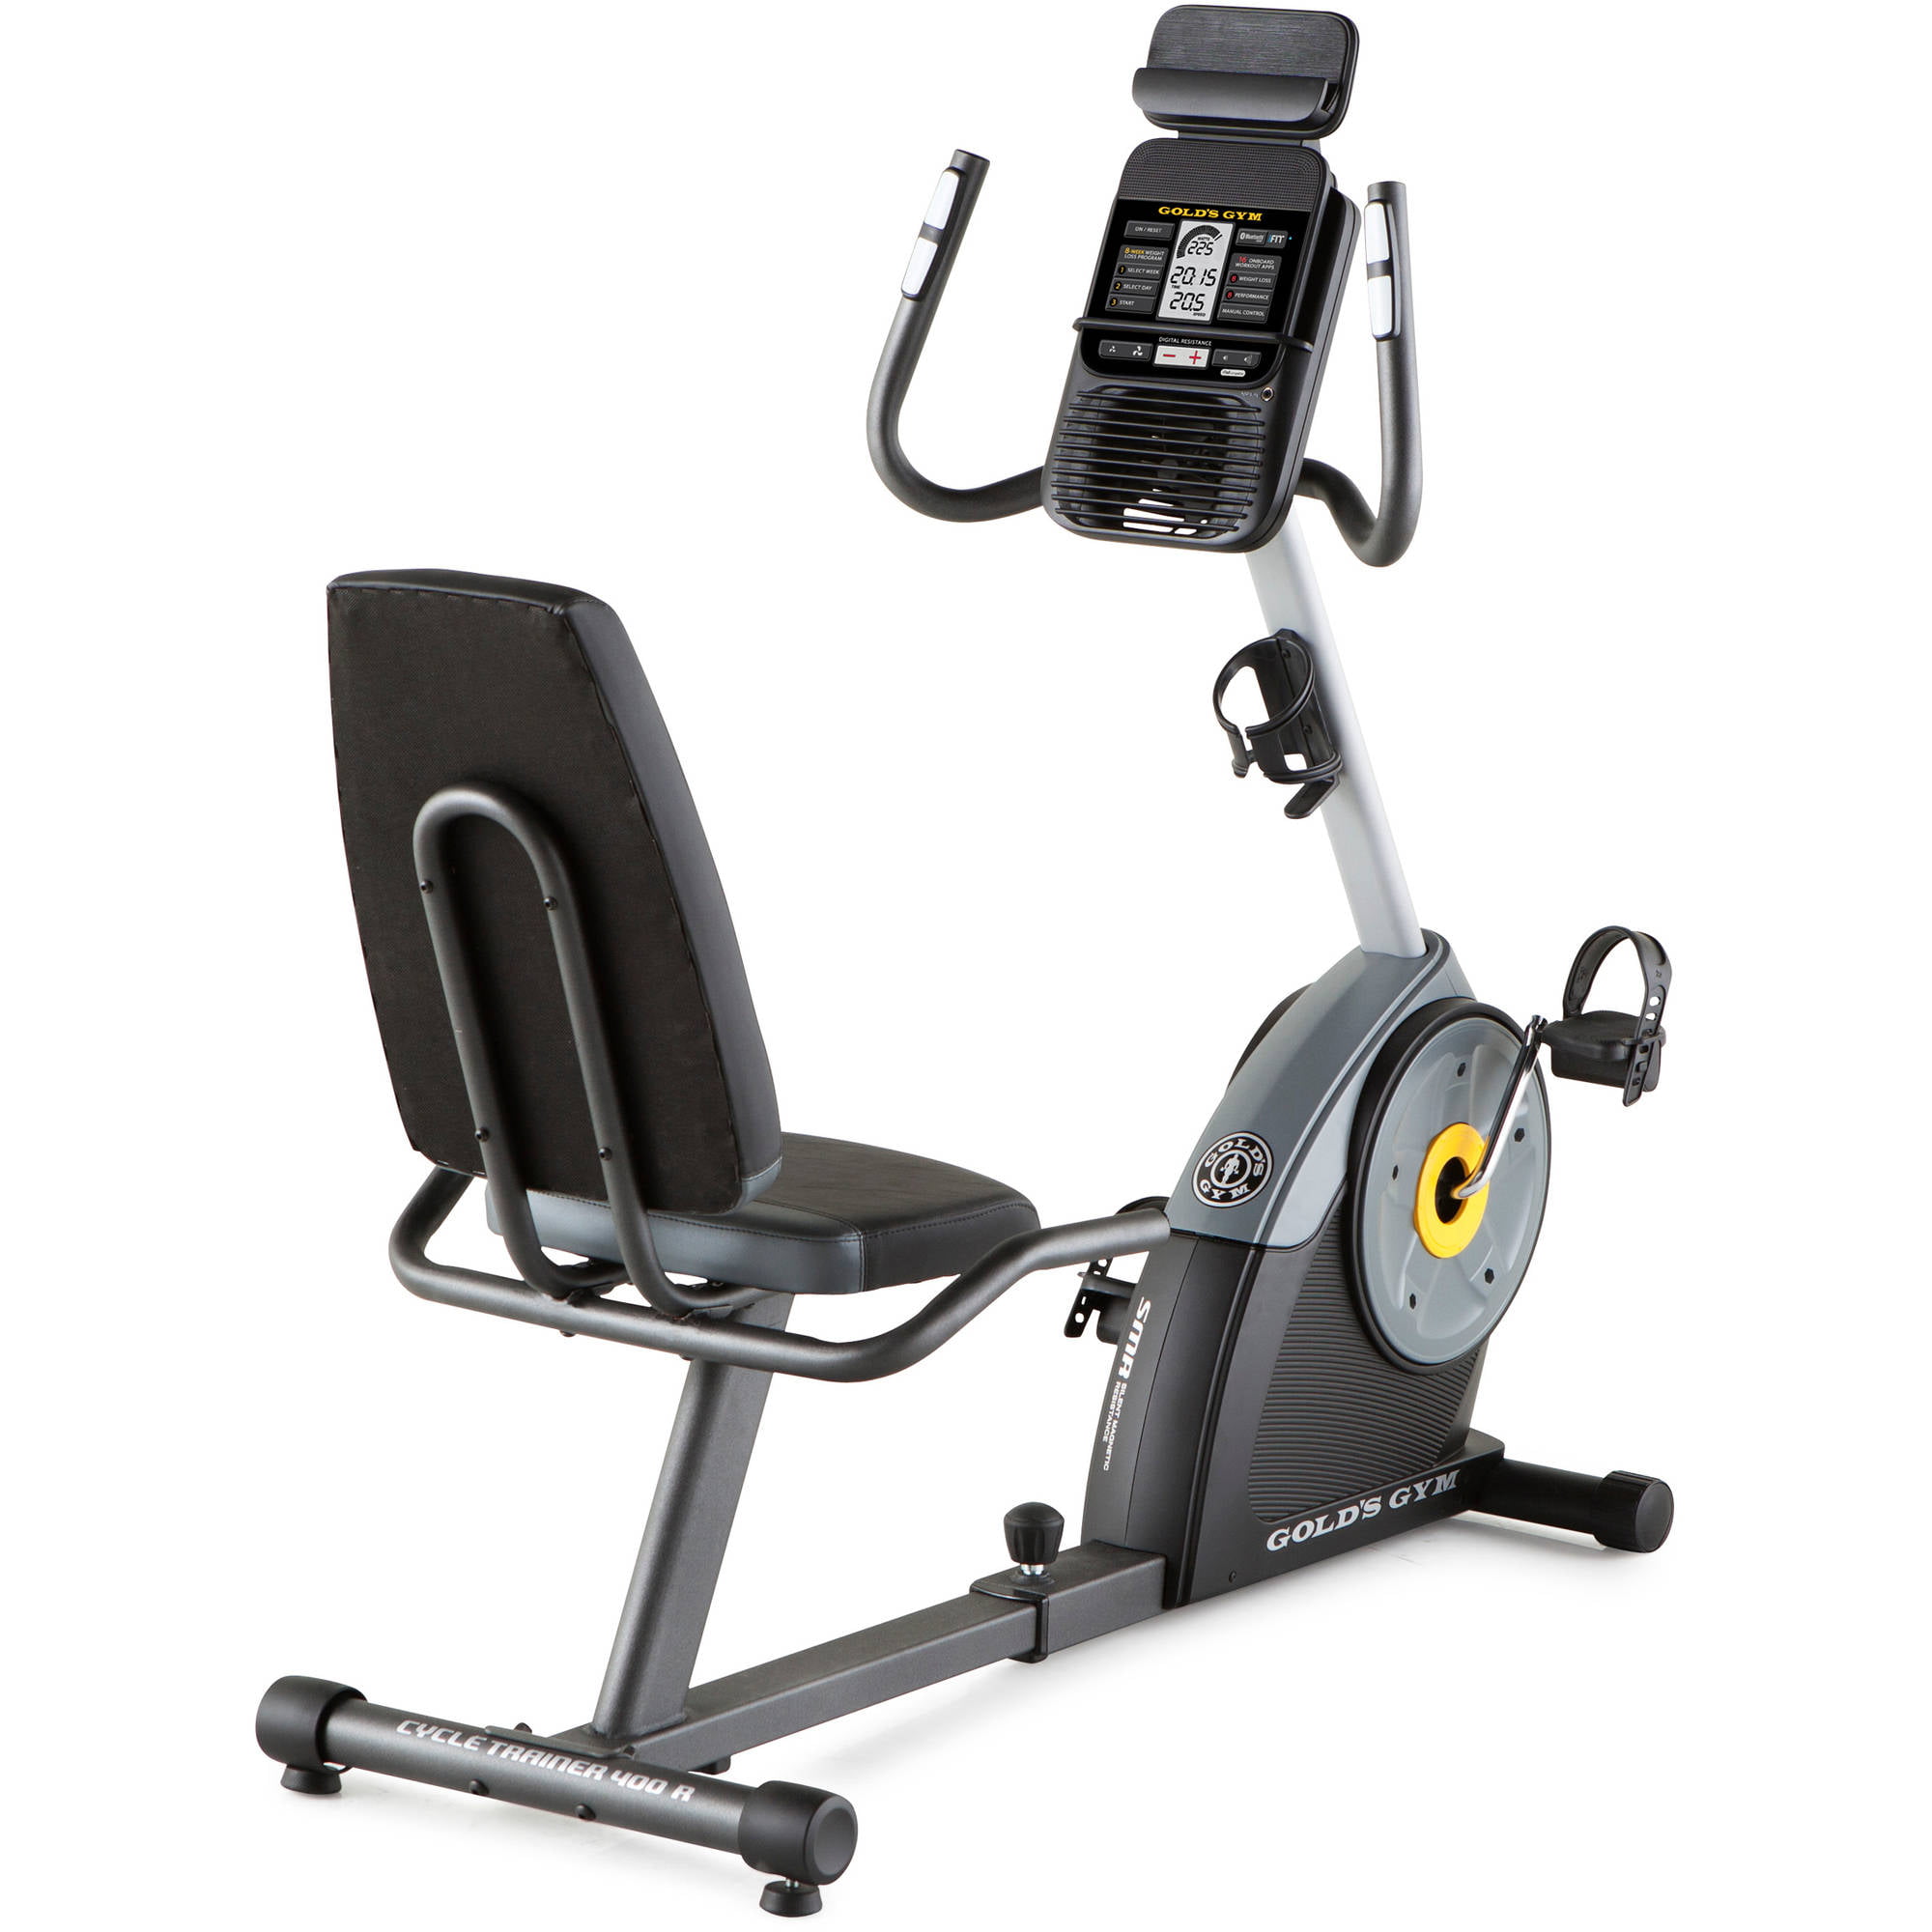 gold's gym cycle trainer 300 ci upright exercise bike